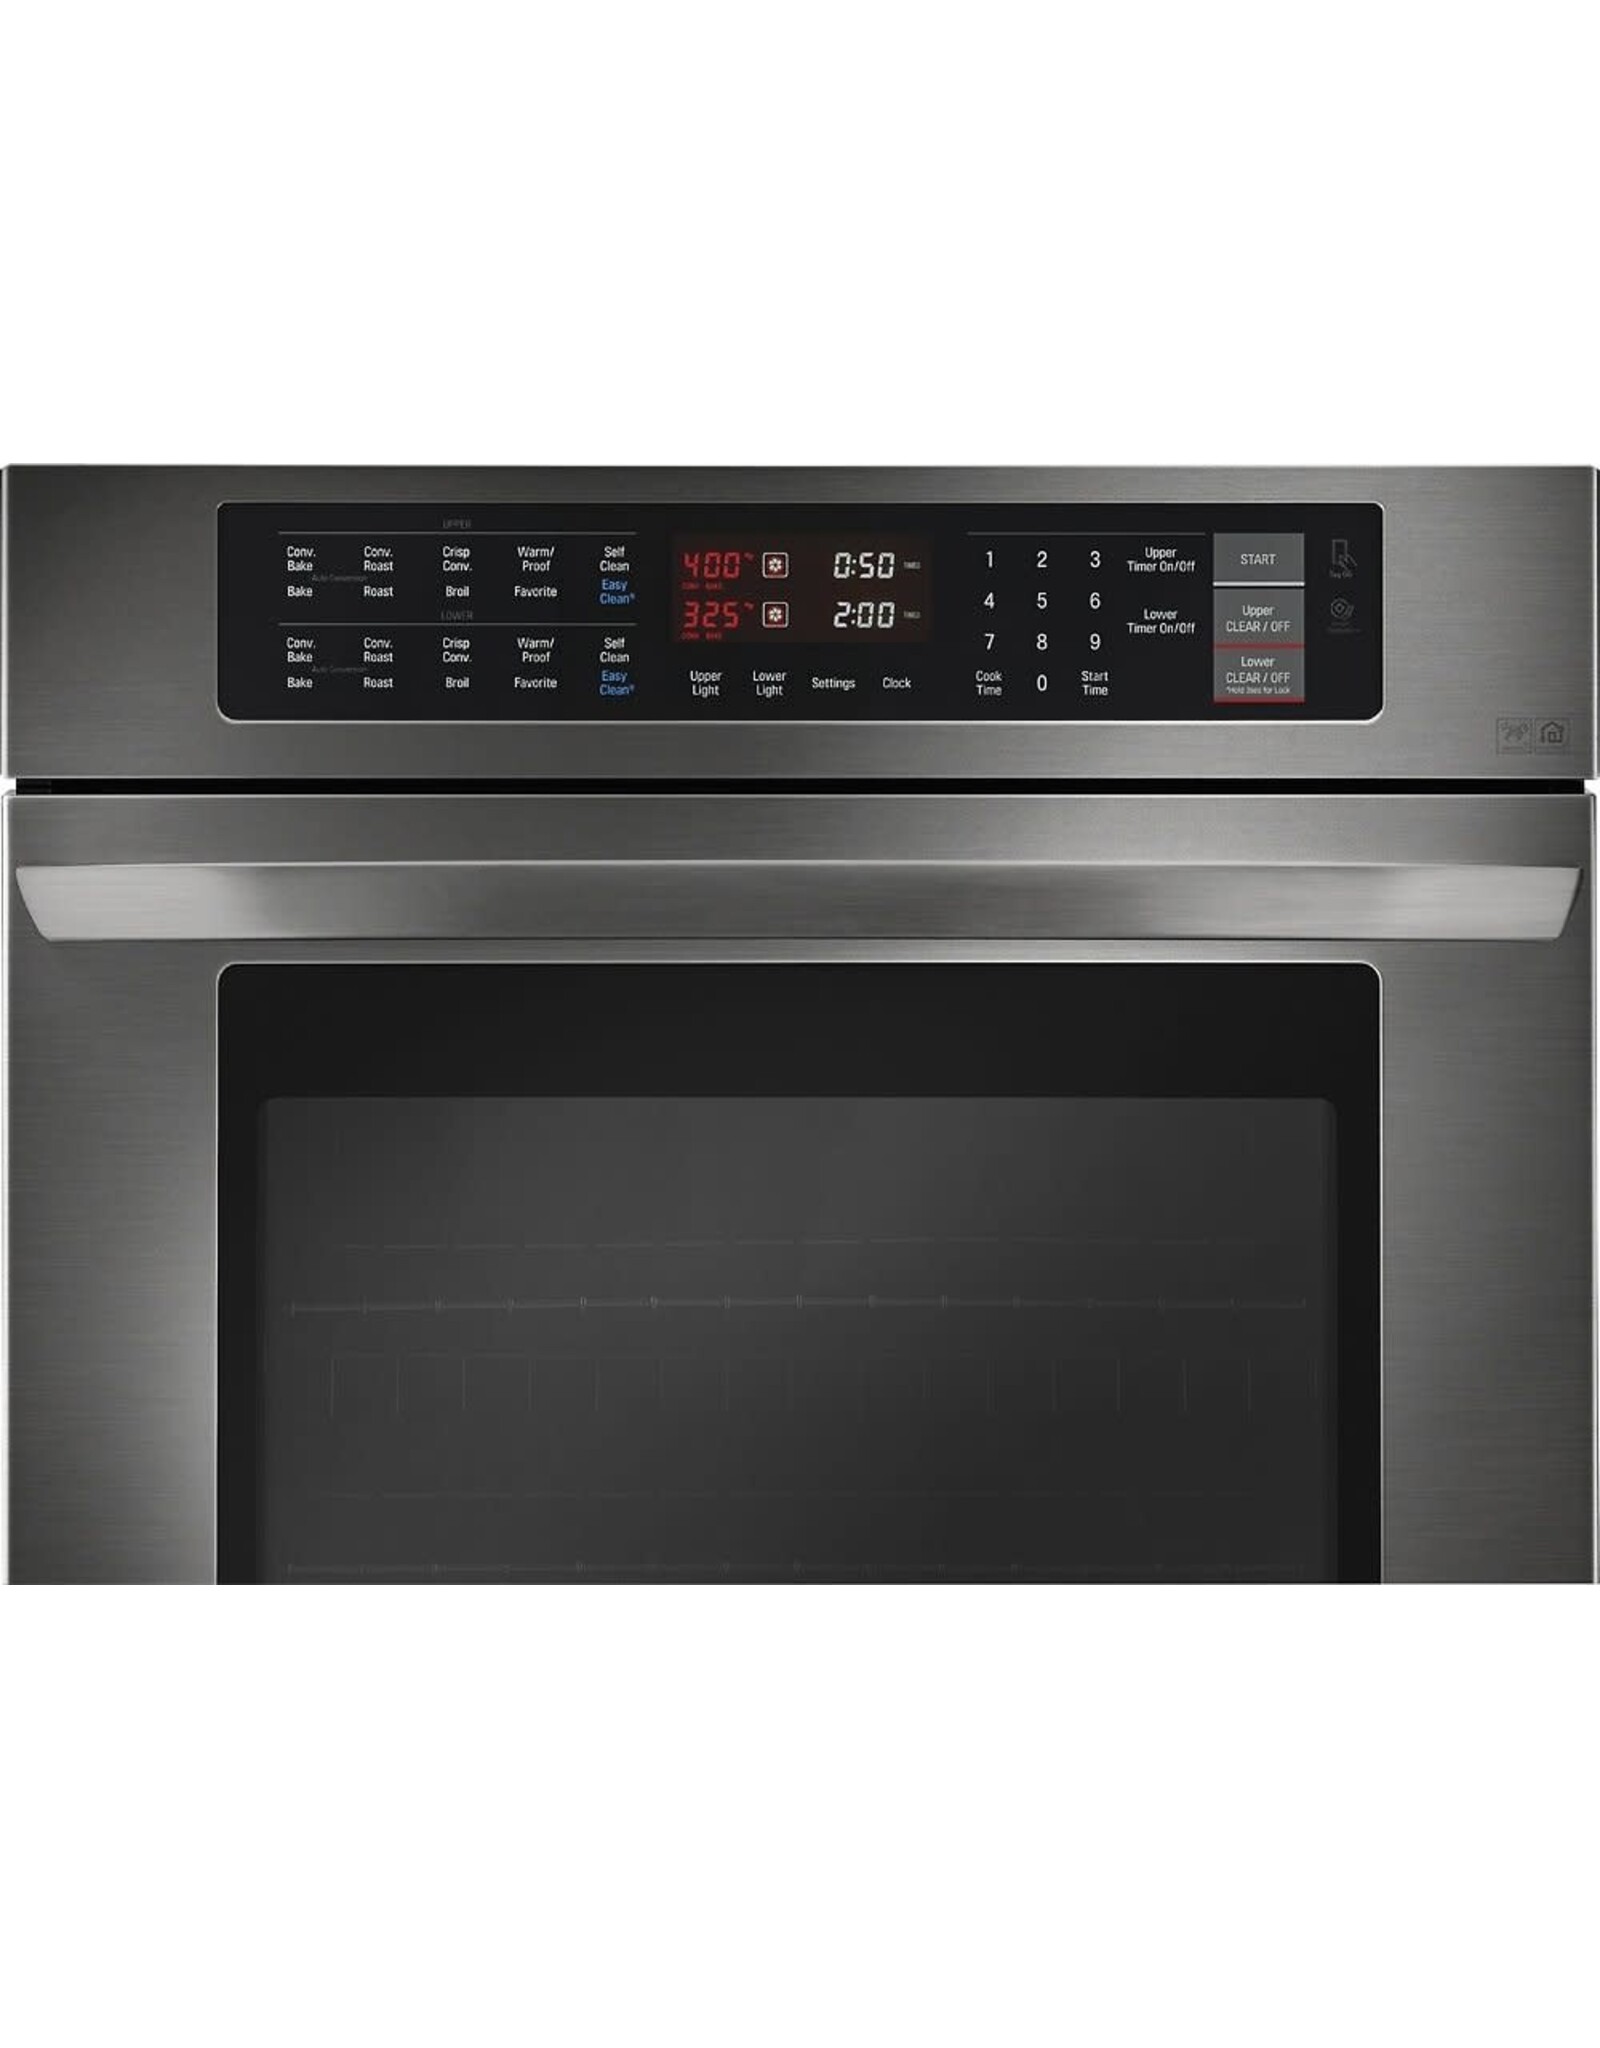 LG Electronics 30 in. Double Electric Wall Oven Self-Cleaning with Convection and EasyClean in Black Stainless Steel